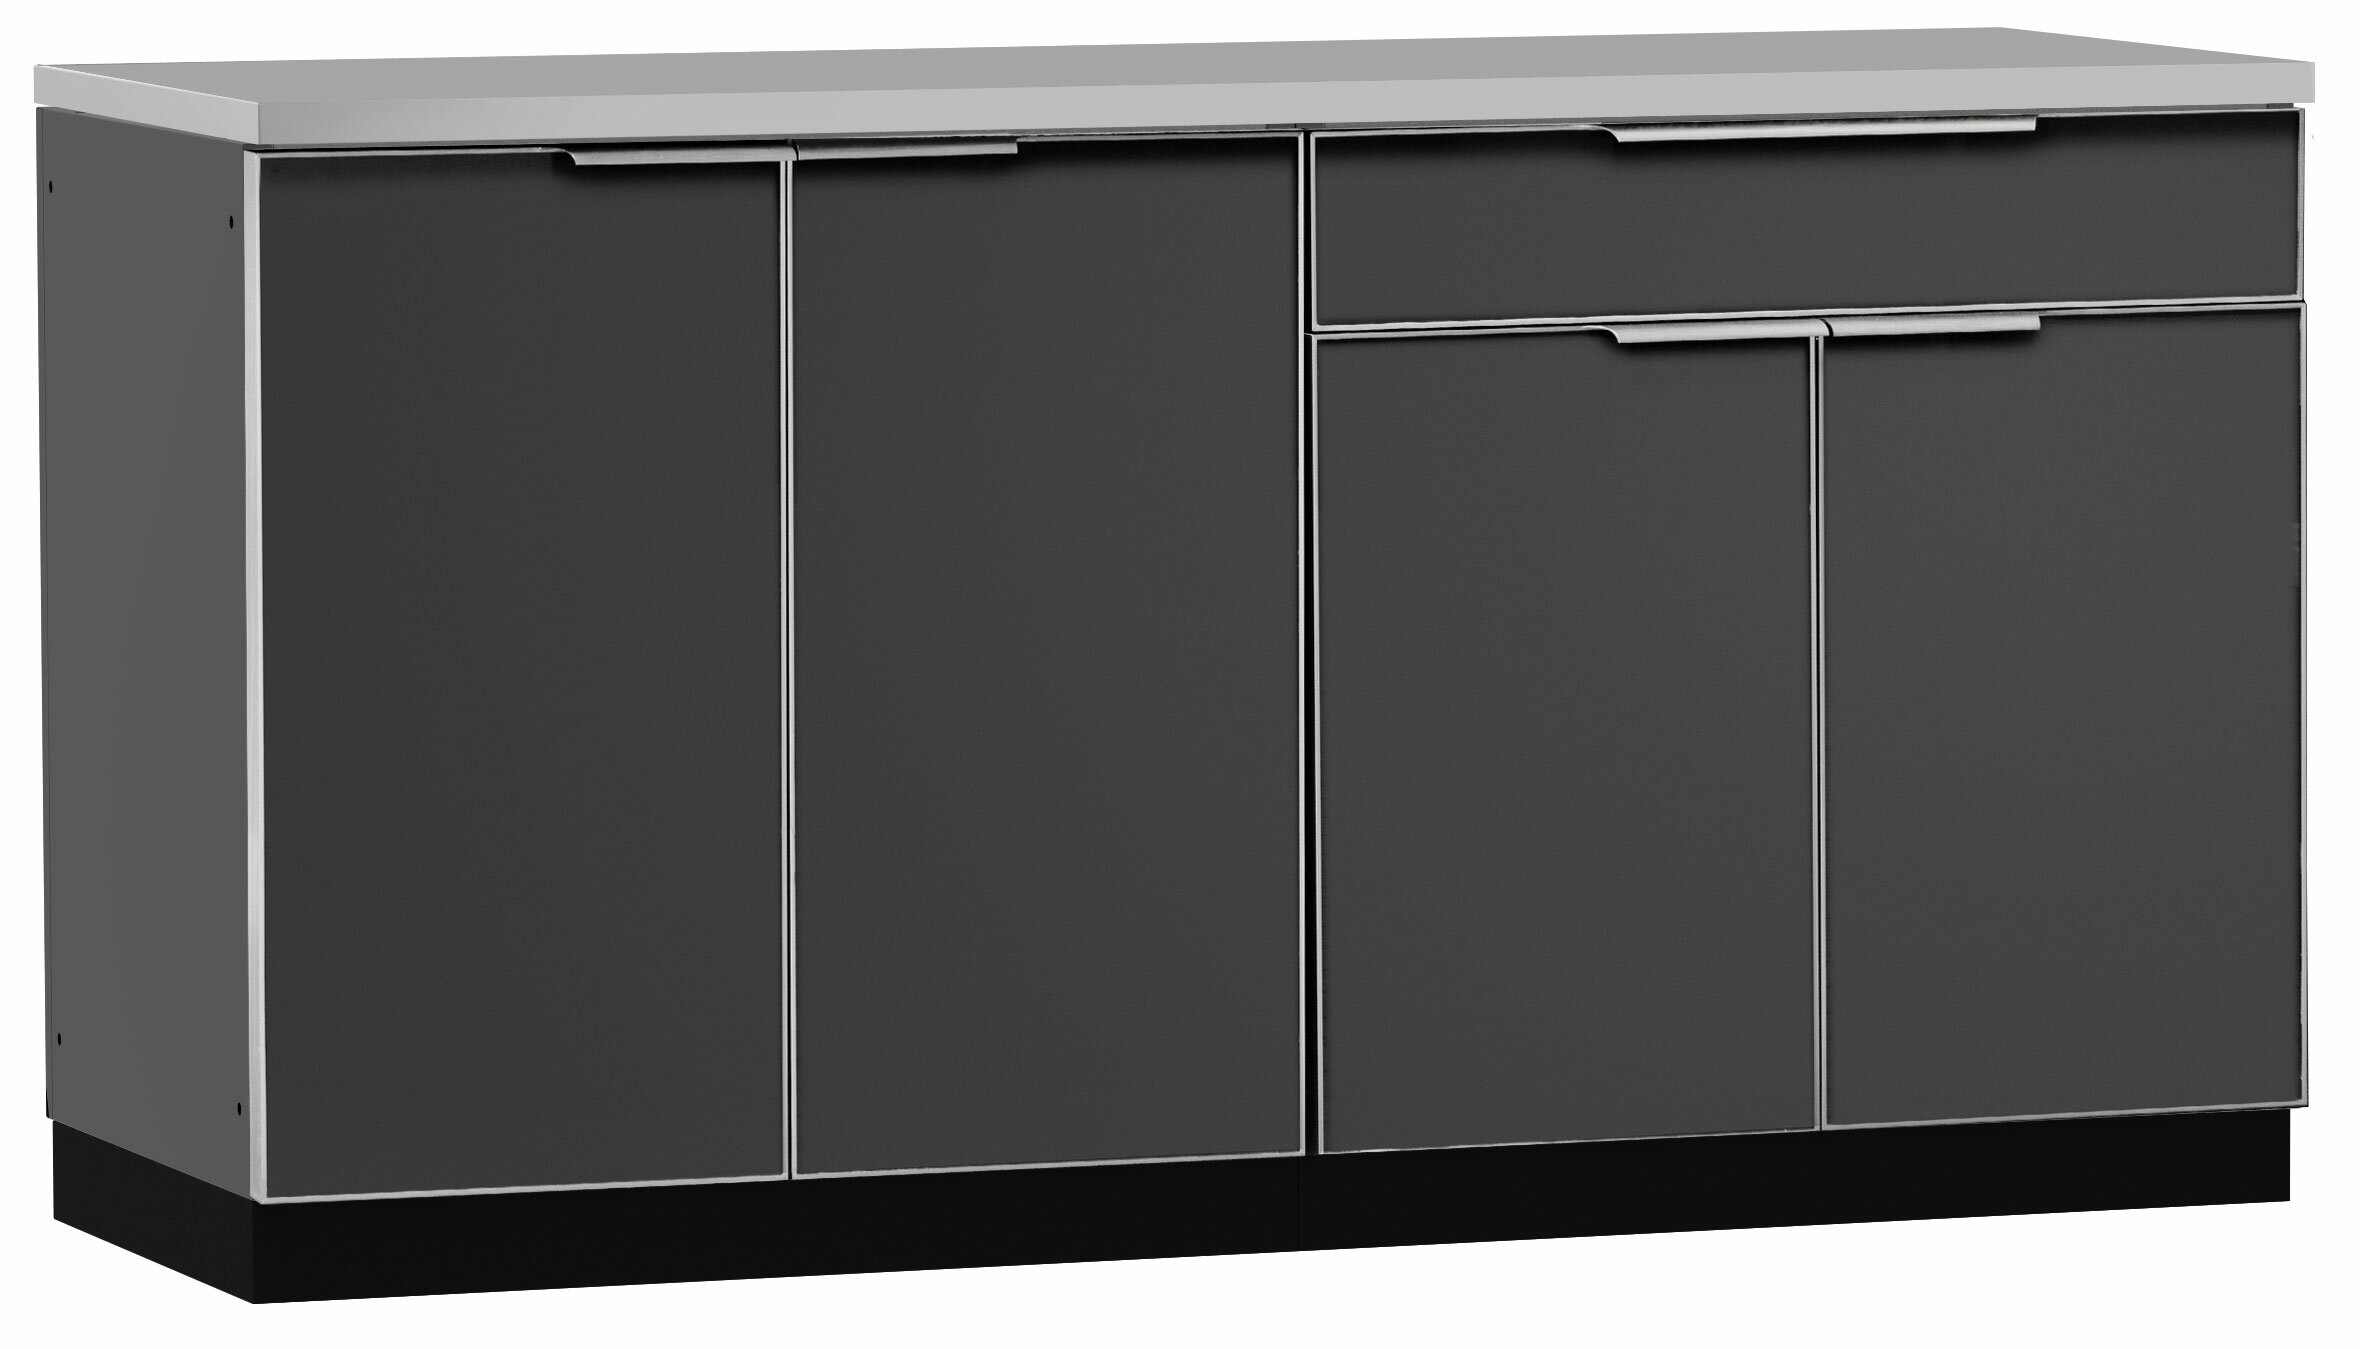 Wet Bar Cabinet With Sink Wayfair within sizing 2360 X 1349